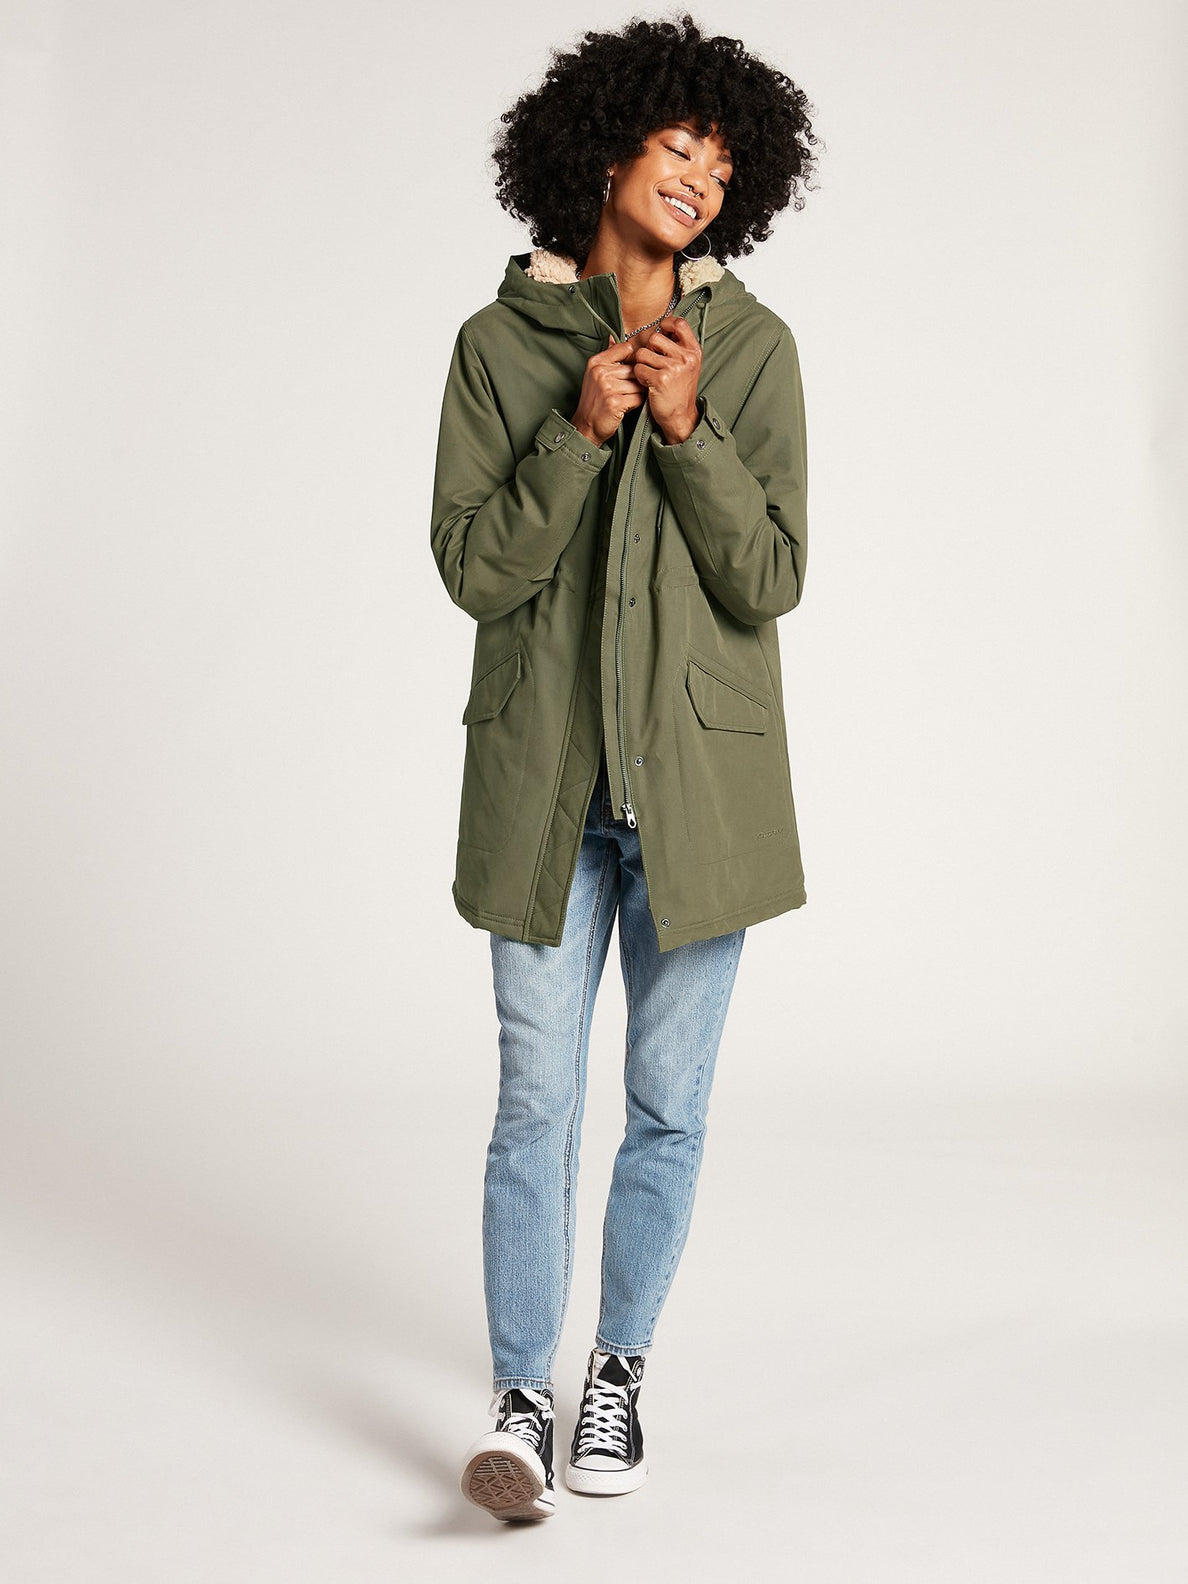 Less Is More 5K Parka - ARMY GREEN COMBO (B1732112_ARC) [3]